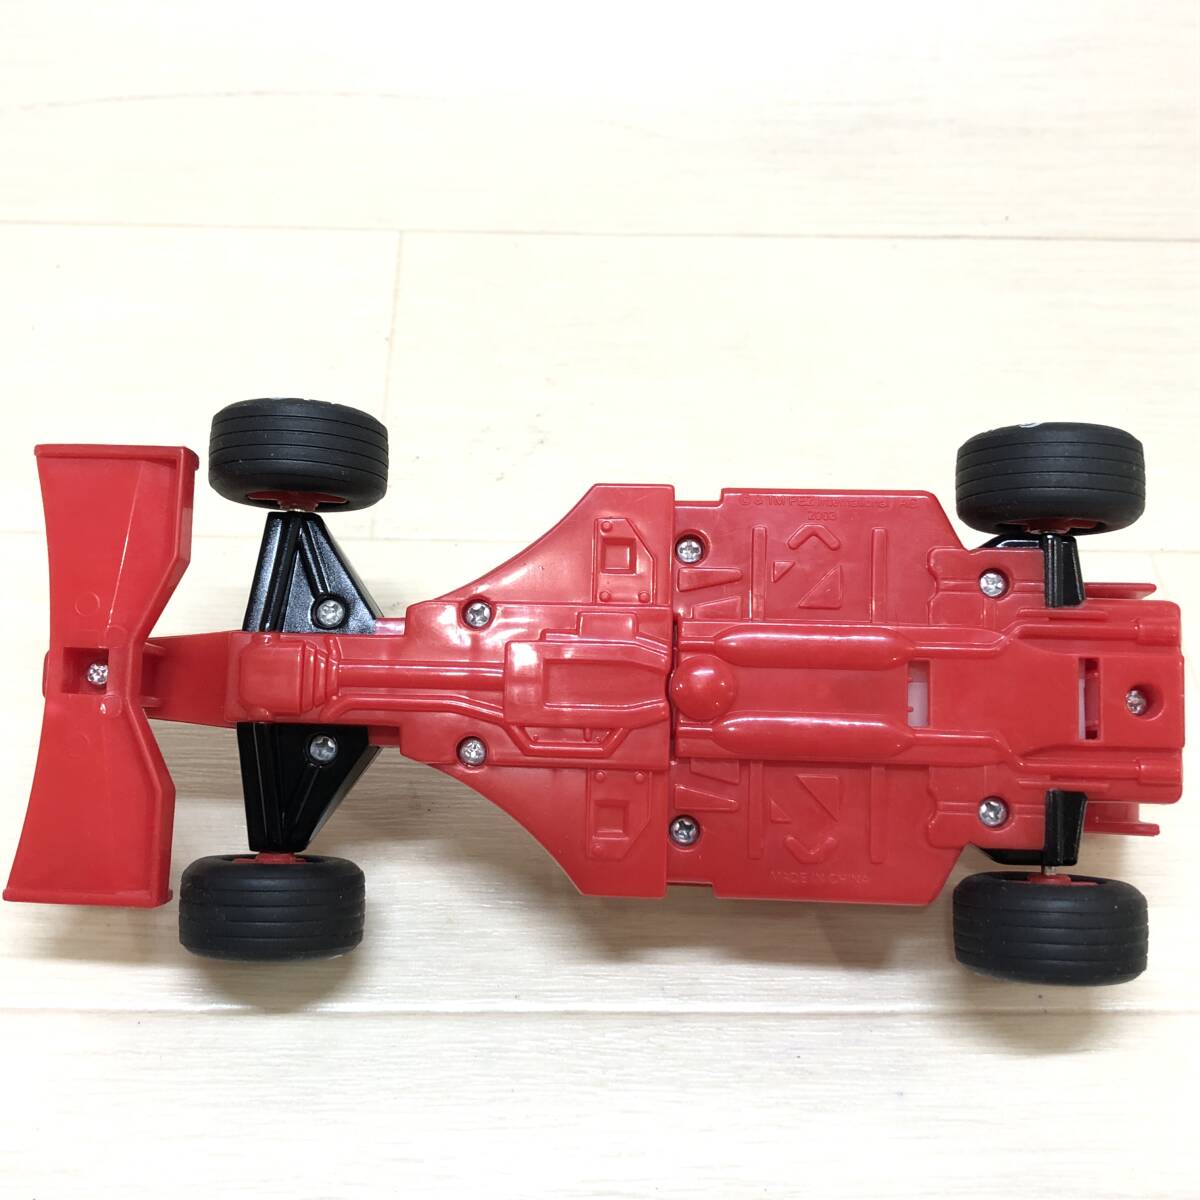 ^PEZpetsu candy - dispenser pullback minicar racing car F1 toy miscellaneous goods collection ^C73722